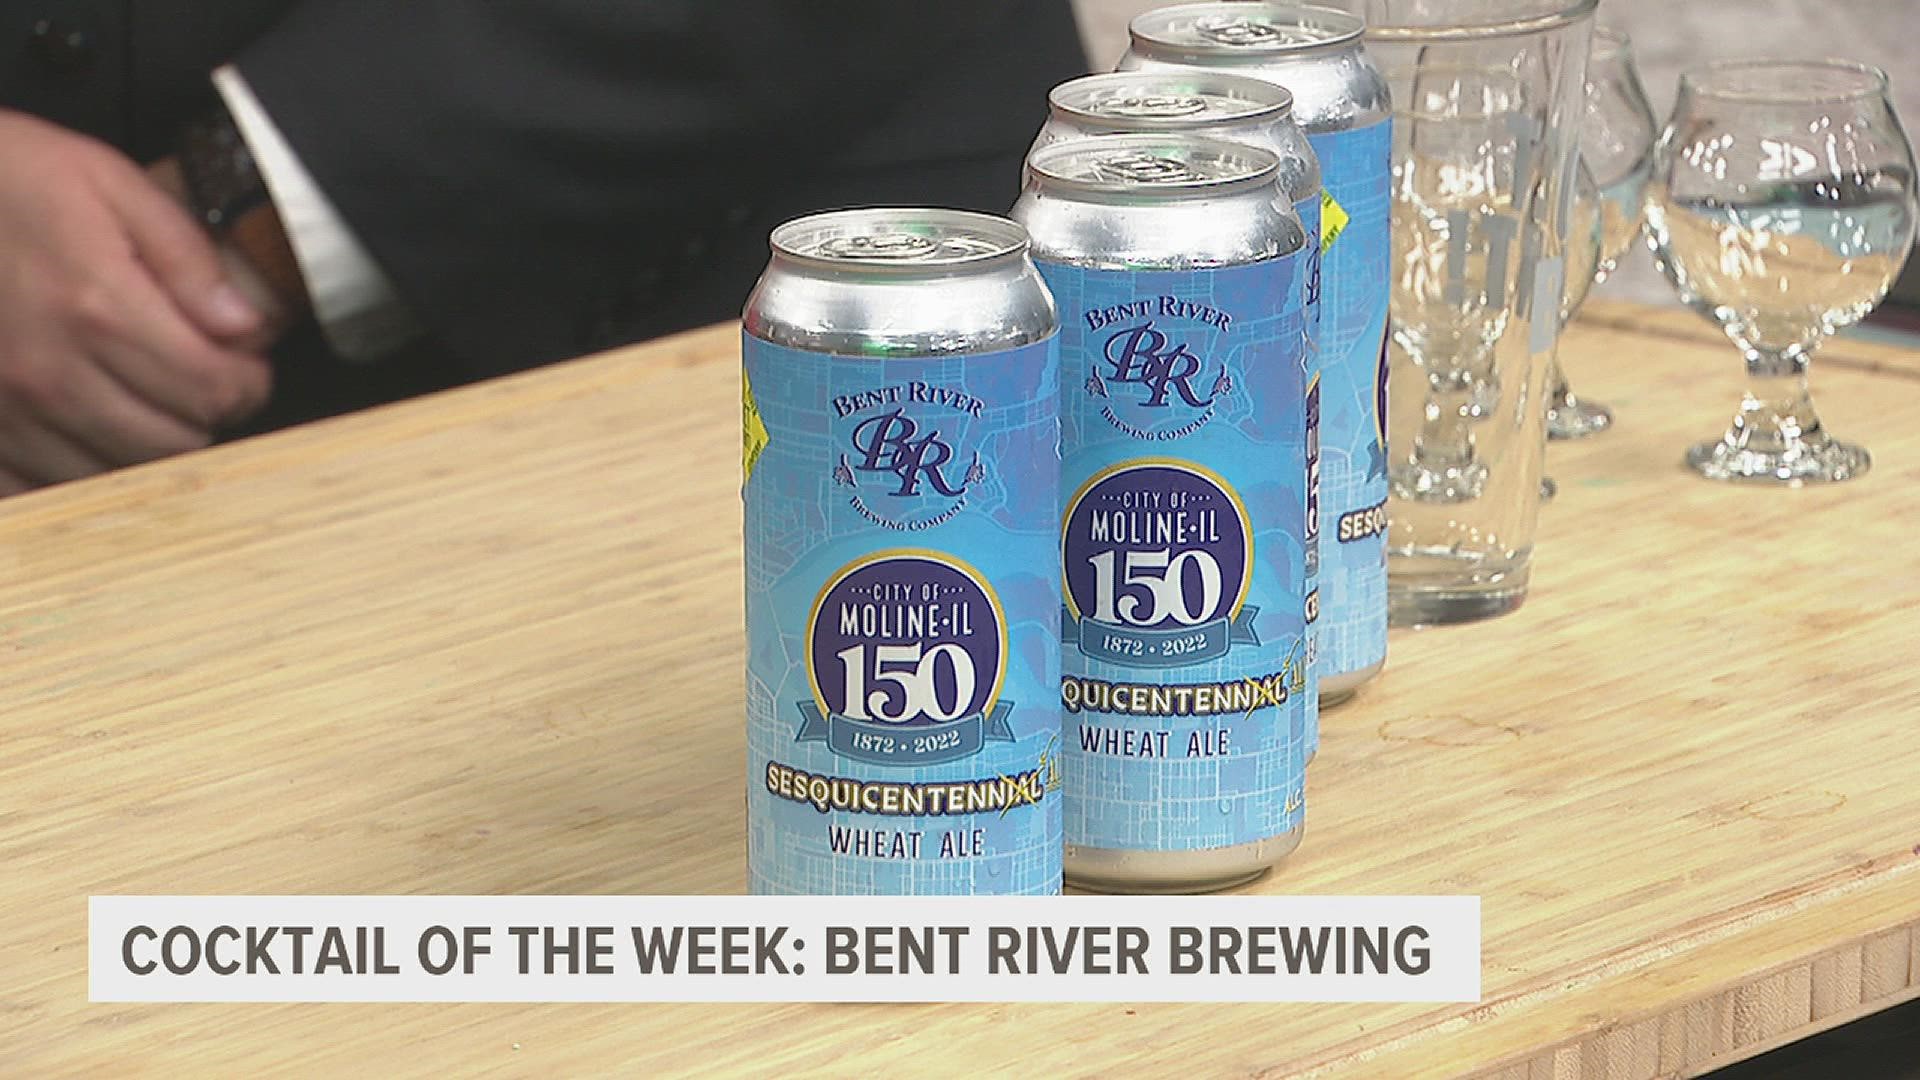 The wheat ale will be available at Bent River locations as well as the official Sesquicentennial celebrations downtown Moline this weekend.